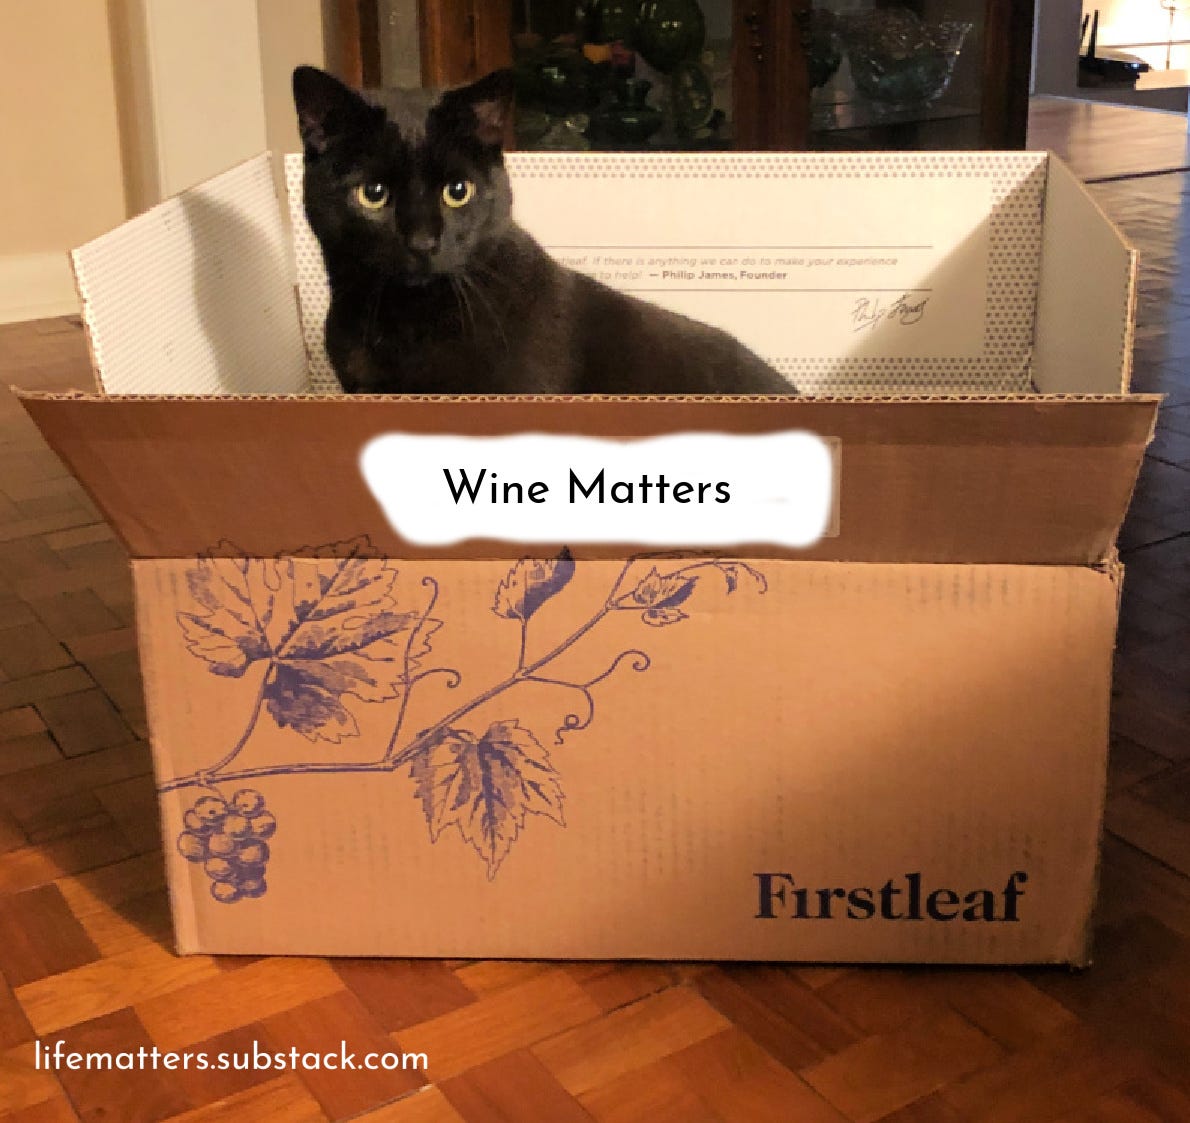 Black cat in Firstleaf wine box labeled Wine Matters